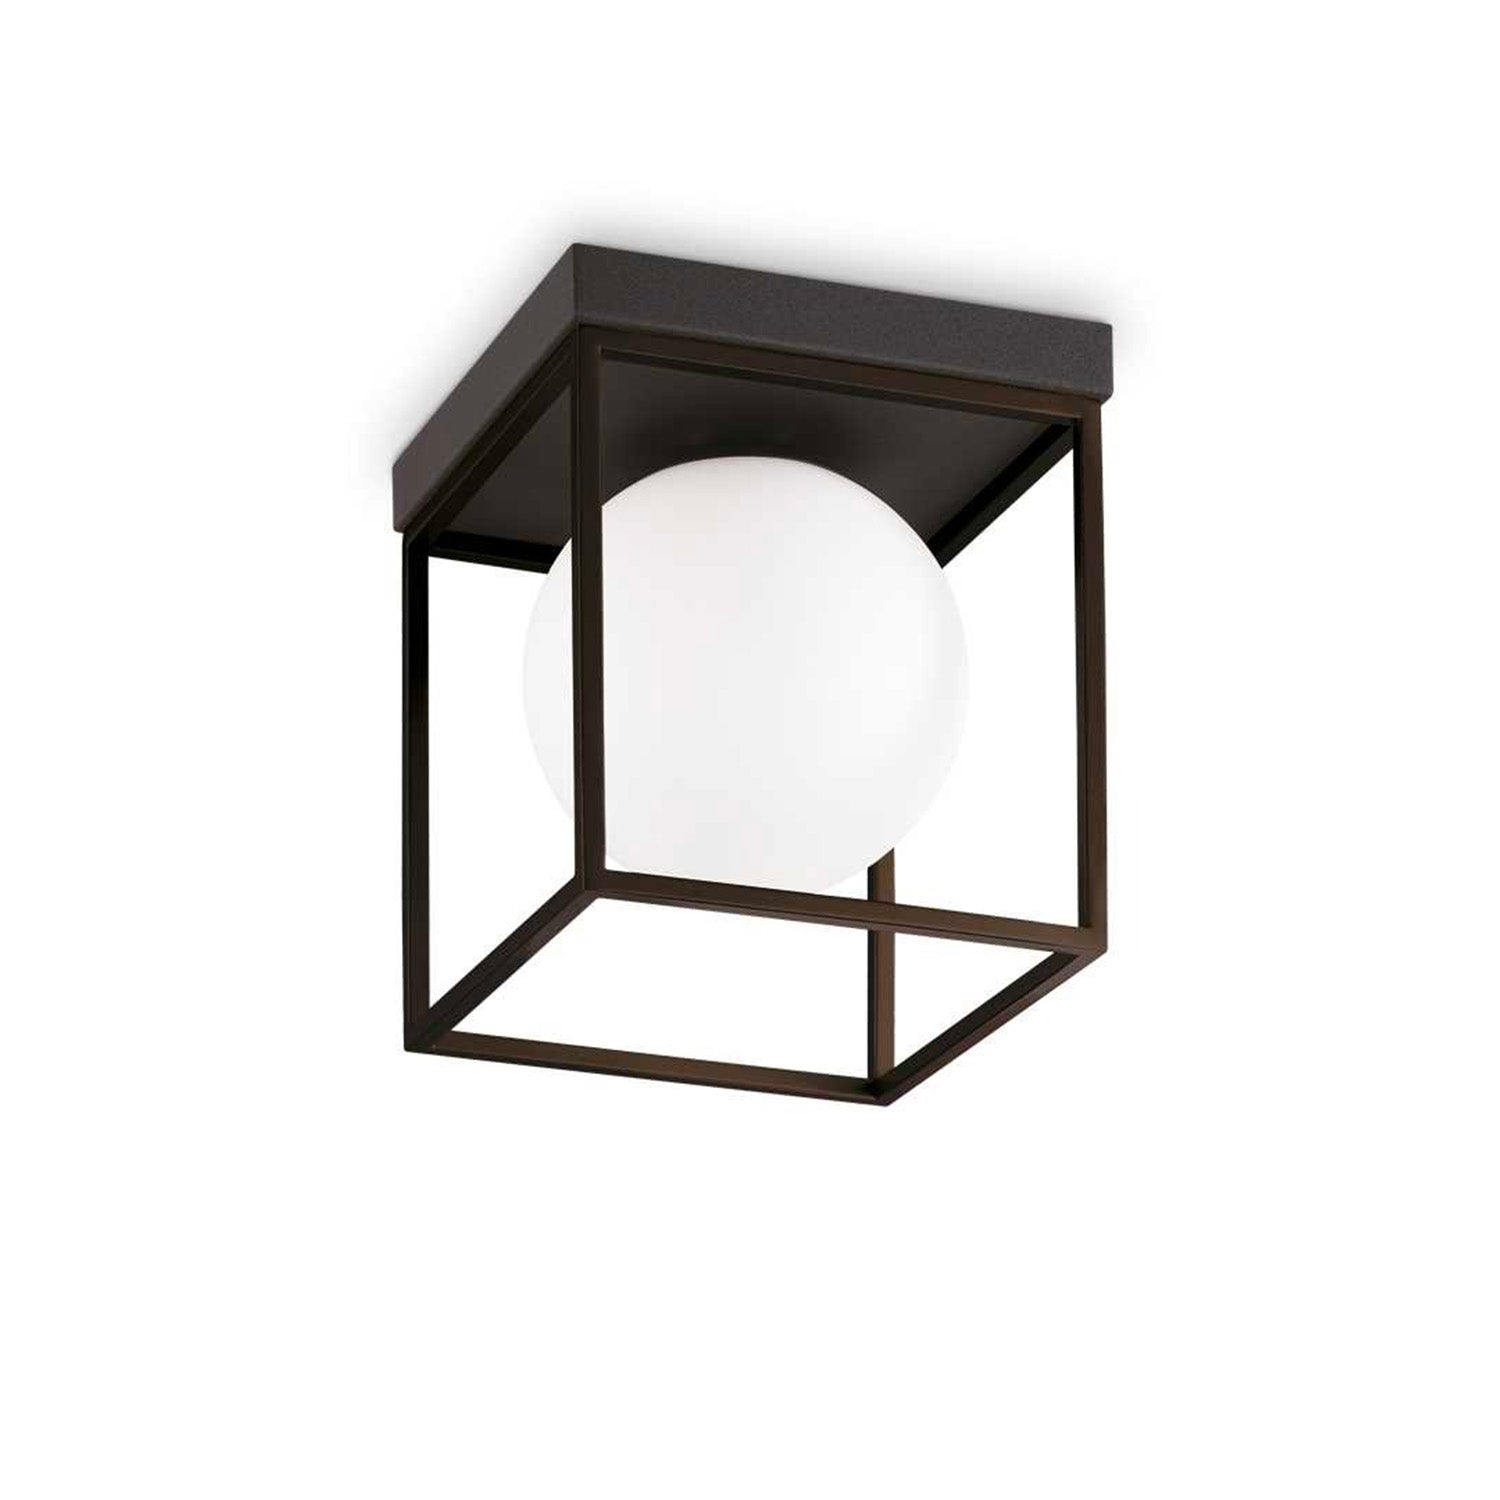 LINGOTTO - Cube ceiling light with glass ball